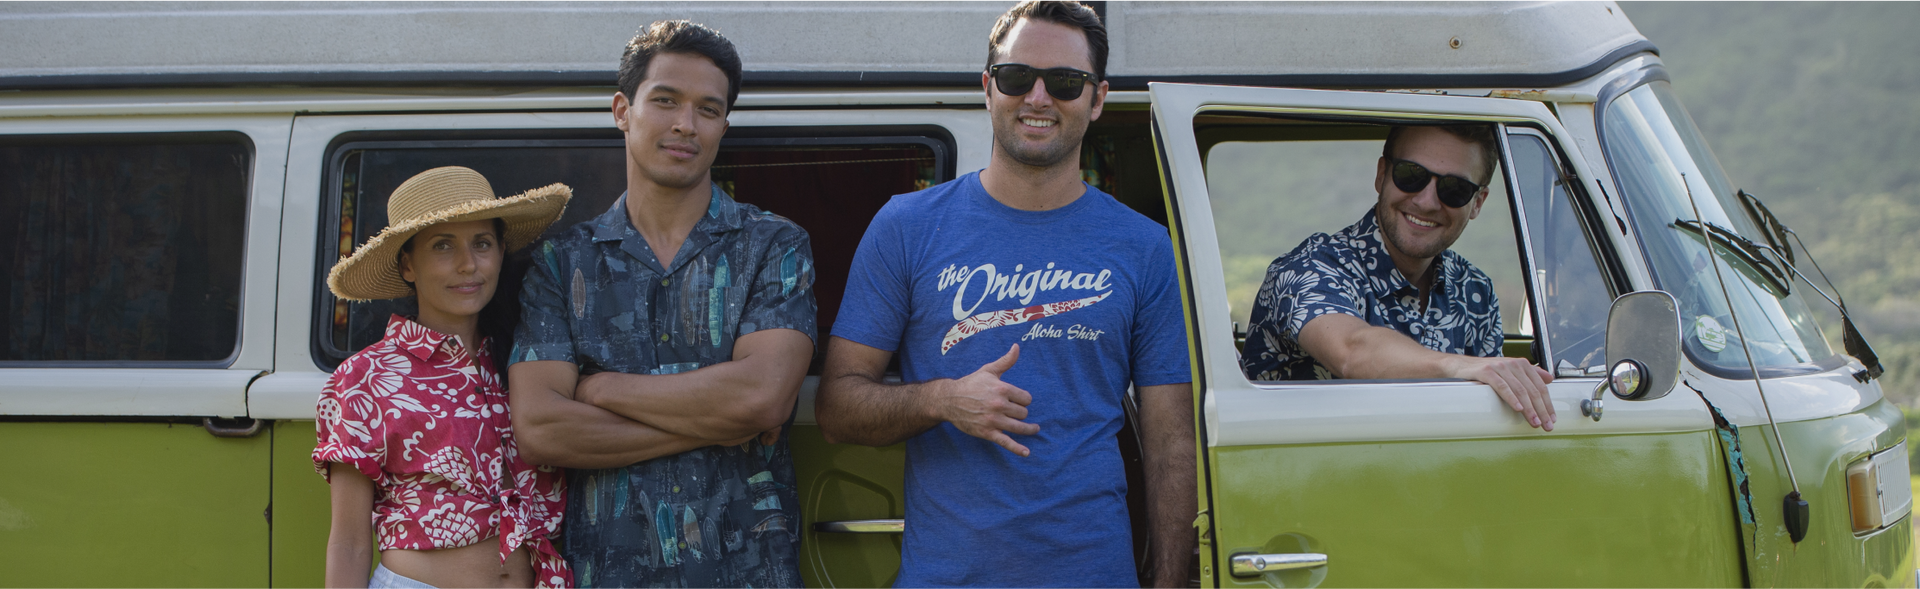 two men and a woman standing leaning back on a green retro looking car with a man looking out the window. They are all wearing Kahala apparel.